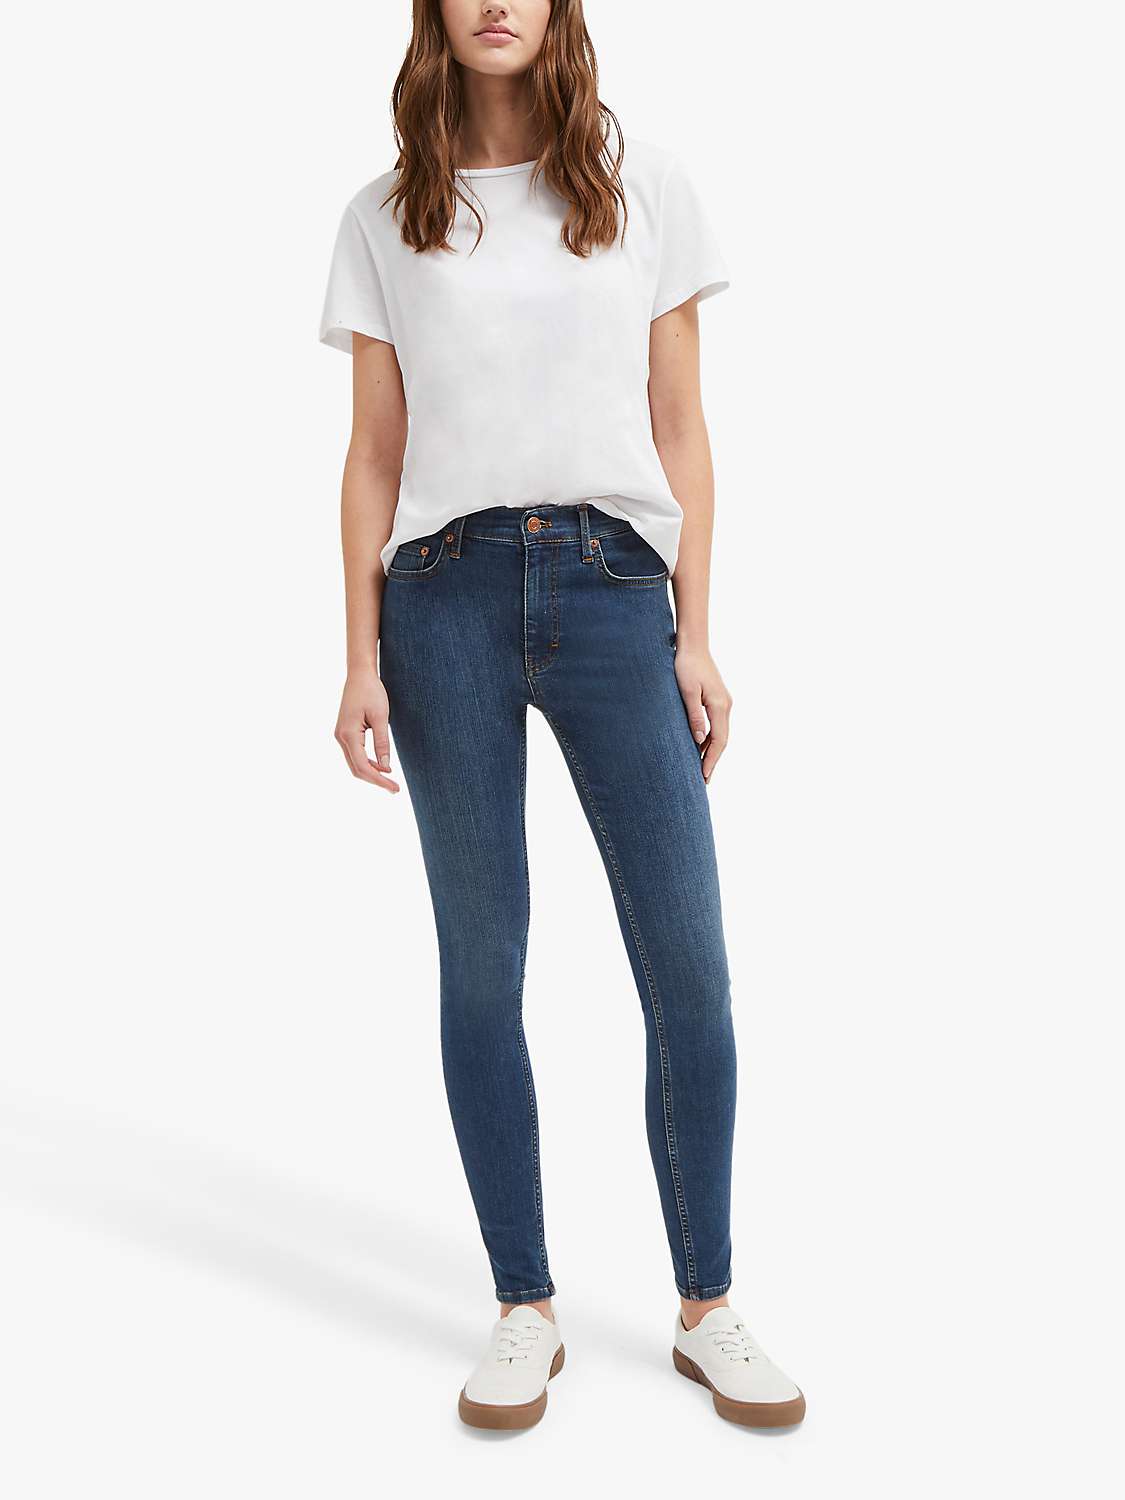 French Connection Skinny Jeans, Vintage at John Lewis & Partners